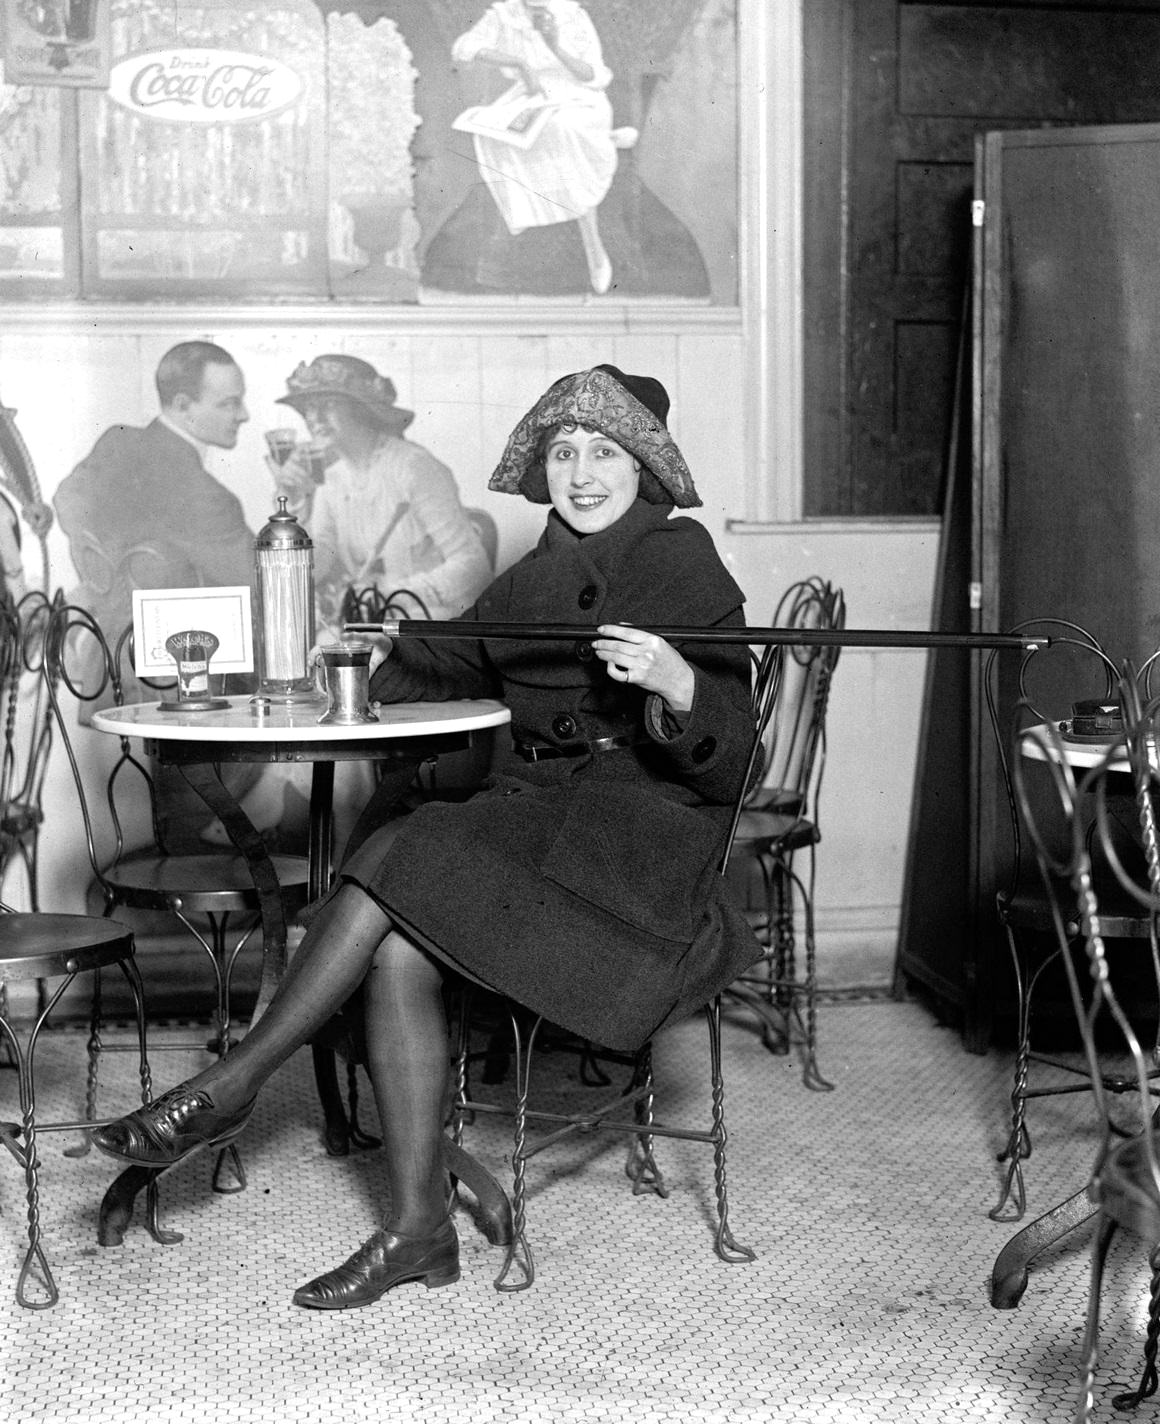 A woman in Cloche Hat, seated at a soda fountain table, as she pours alcohol from a cane into a cup during Prohibition, 1922